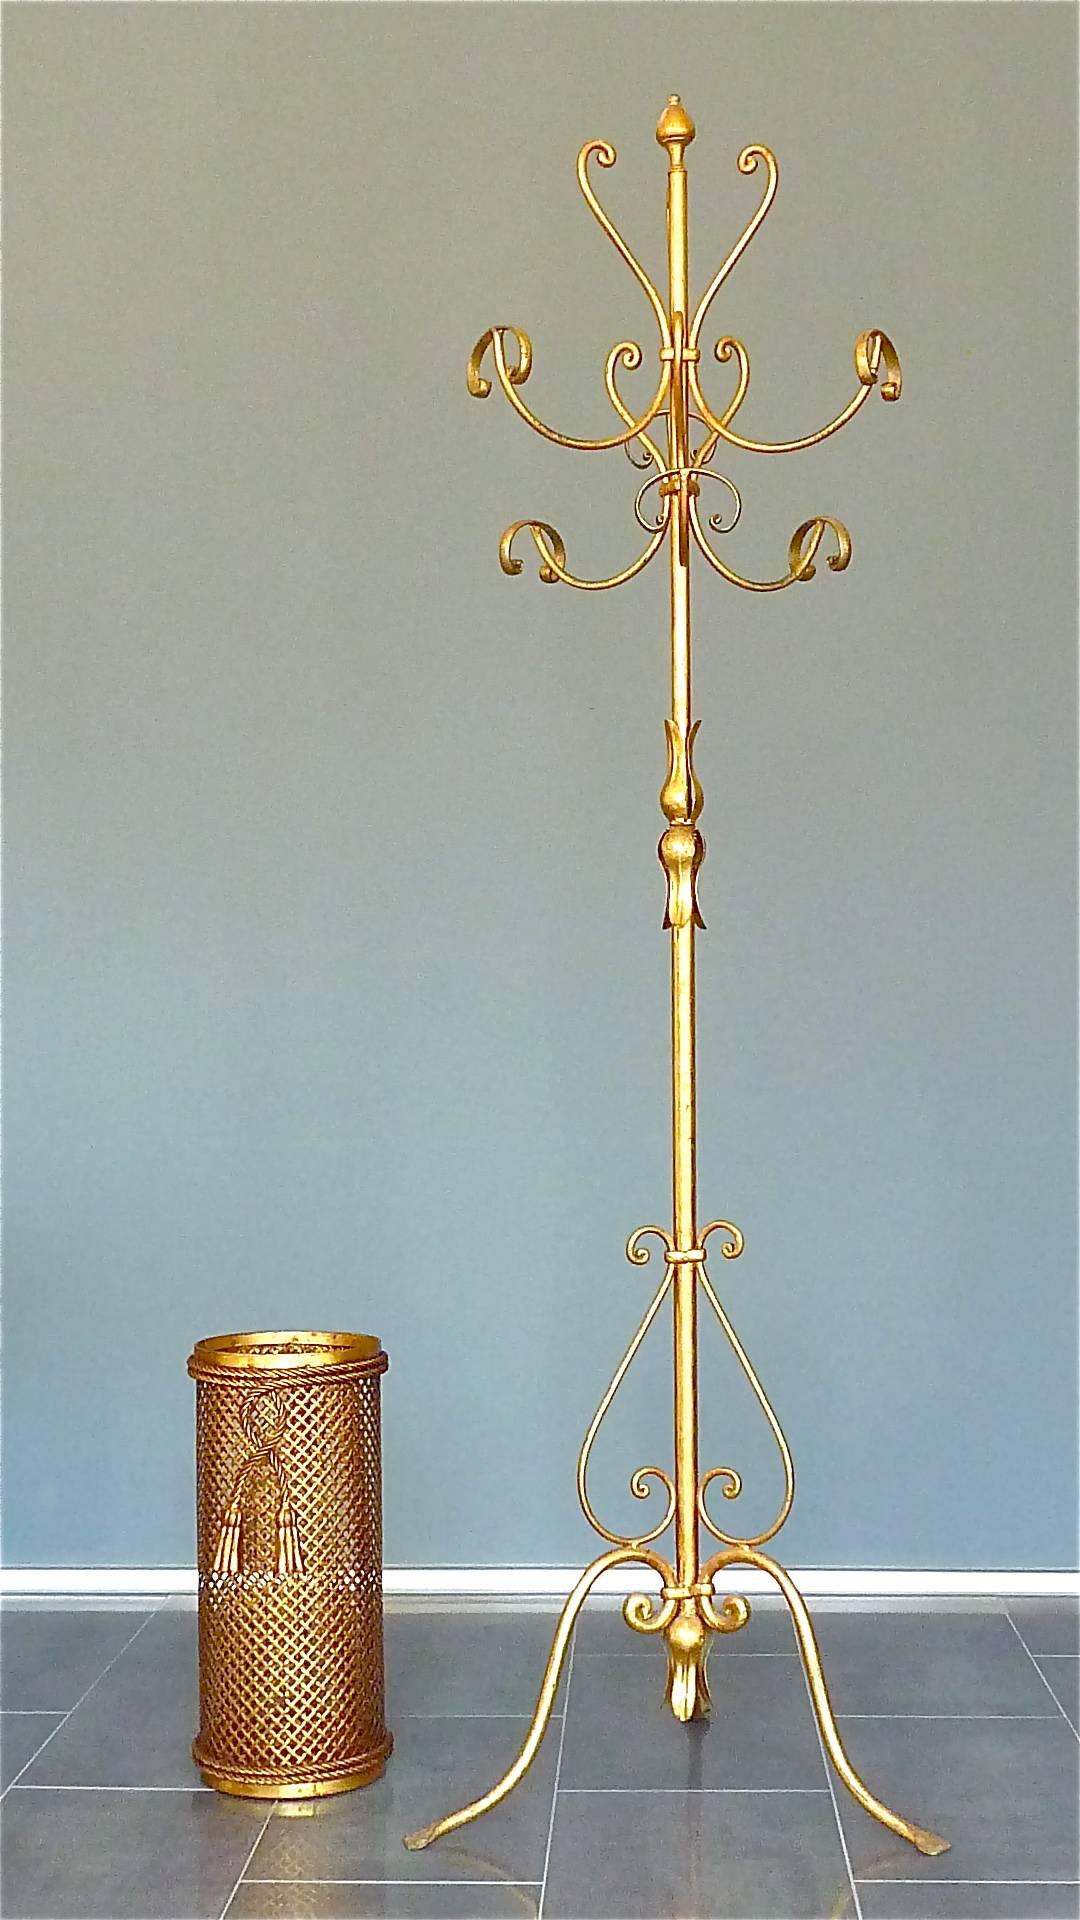 A beautiful Italian Midcentury gilt wrought iron and metal coat stand or hat rack in the style of Hans Kögl, Italy, circa 1950s. The coat stand which has a width of about 56 cm / 22.05 inches and which is 185 cm / 72.83 inches tall has a tripod